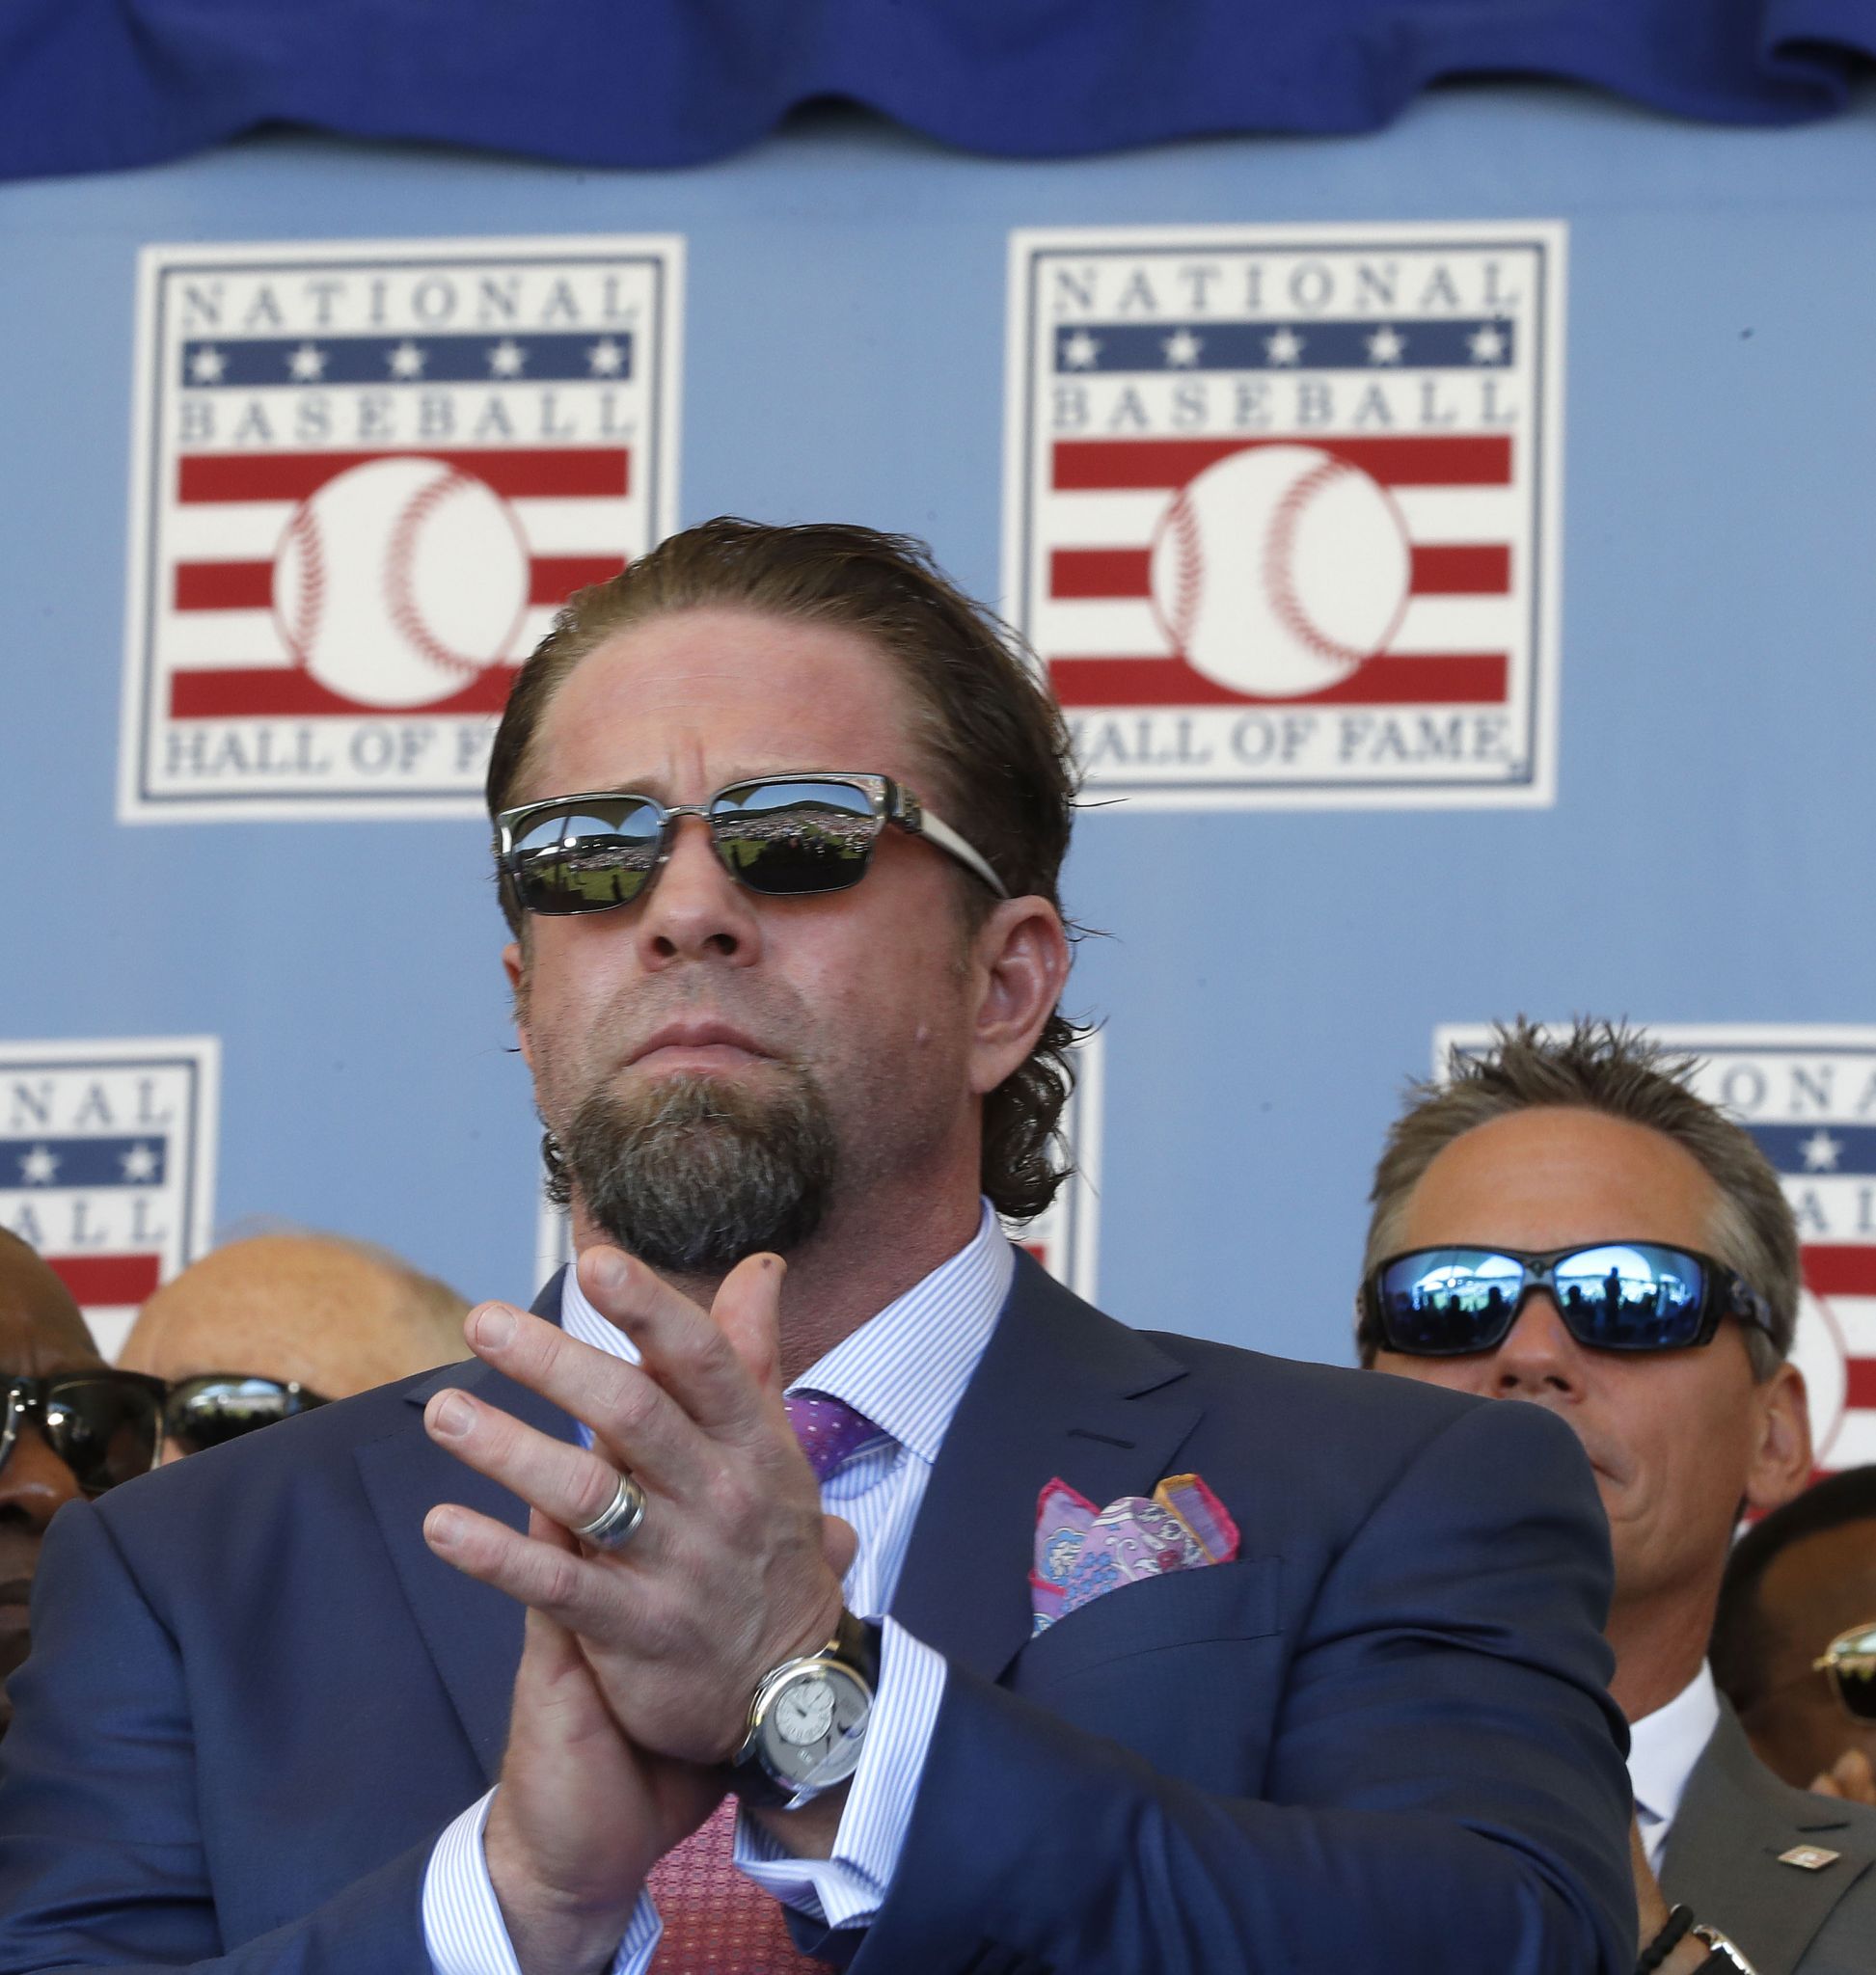 Jeff Bagwell thanks shapers of career in Hall induction speech